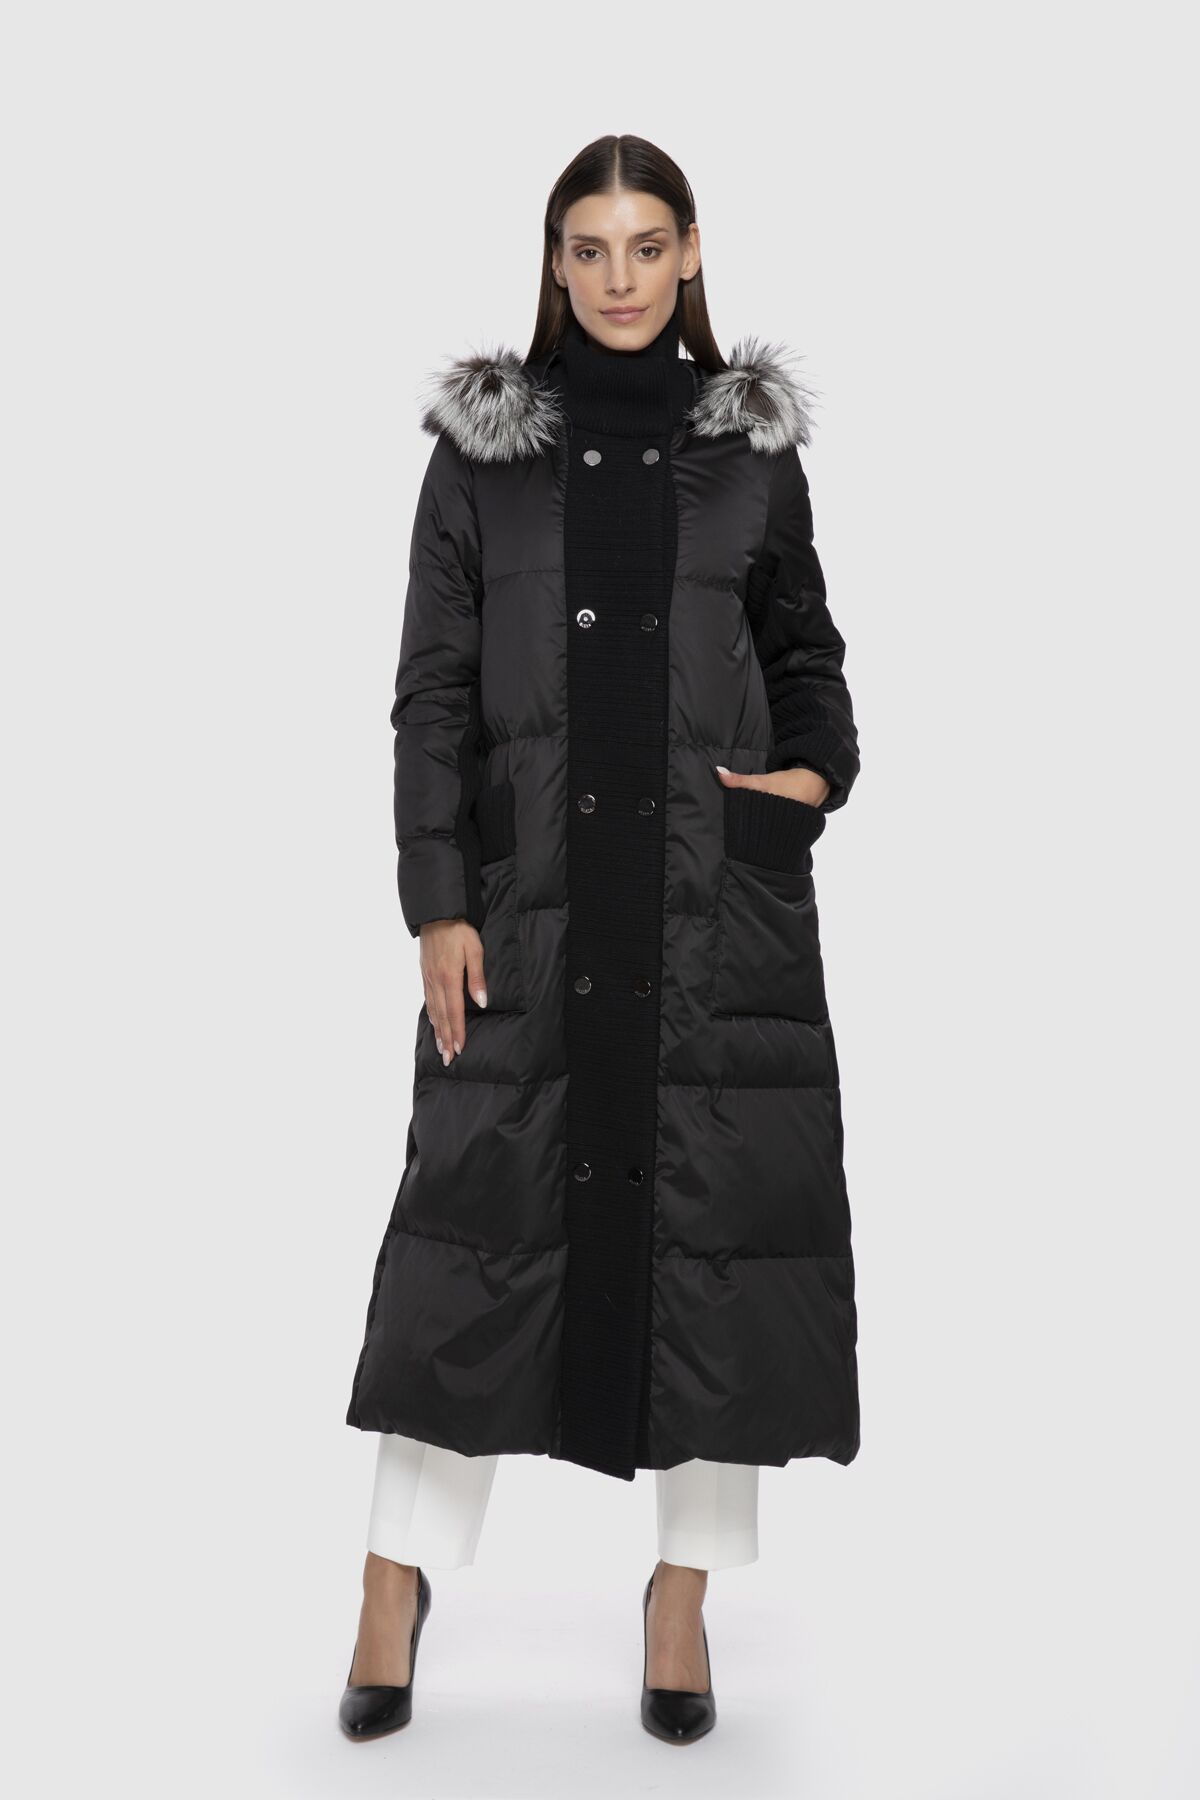  GIZIA - Knitwear And Fur Detailed Hooded Black Long Inflatable Coat